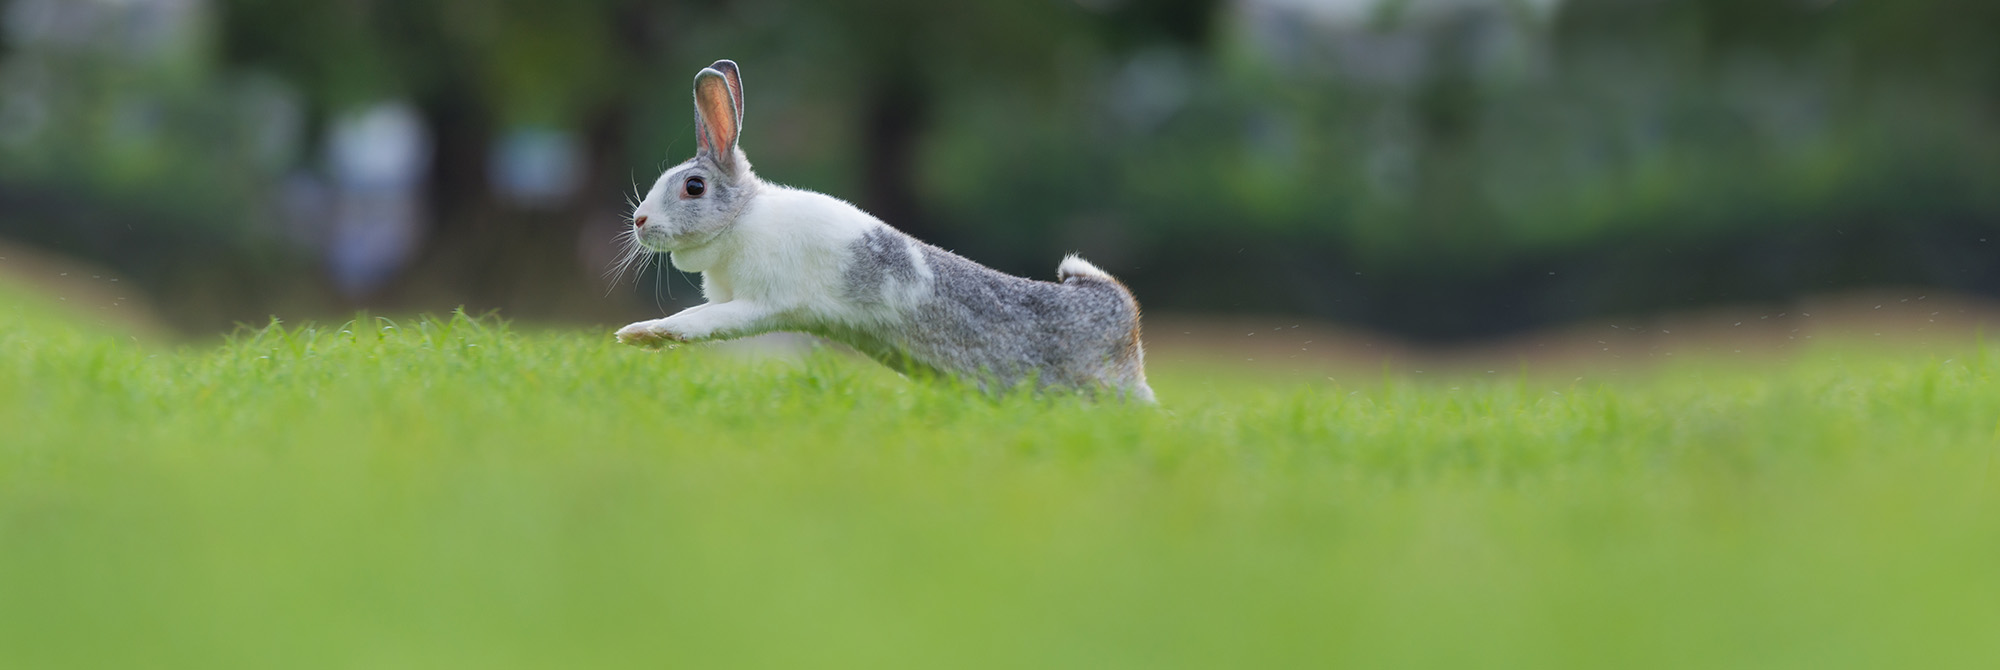 WM: Sustainability Article 8 - A ‘surprise’ bounce in the Year of the Rabbit?